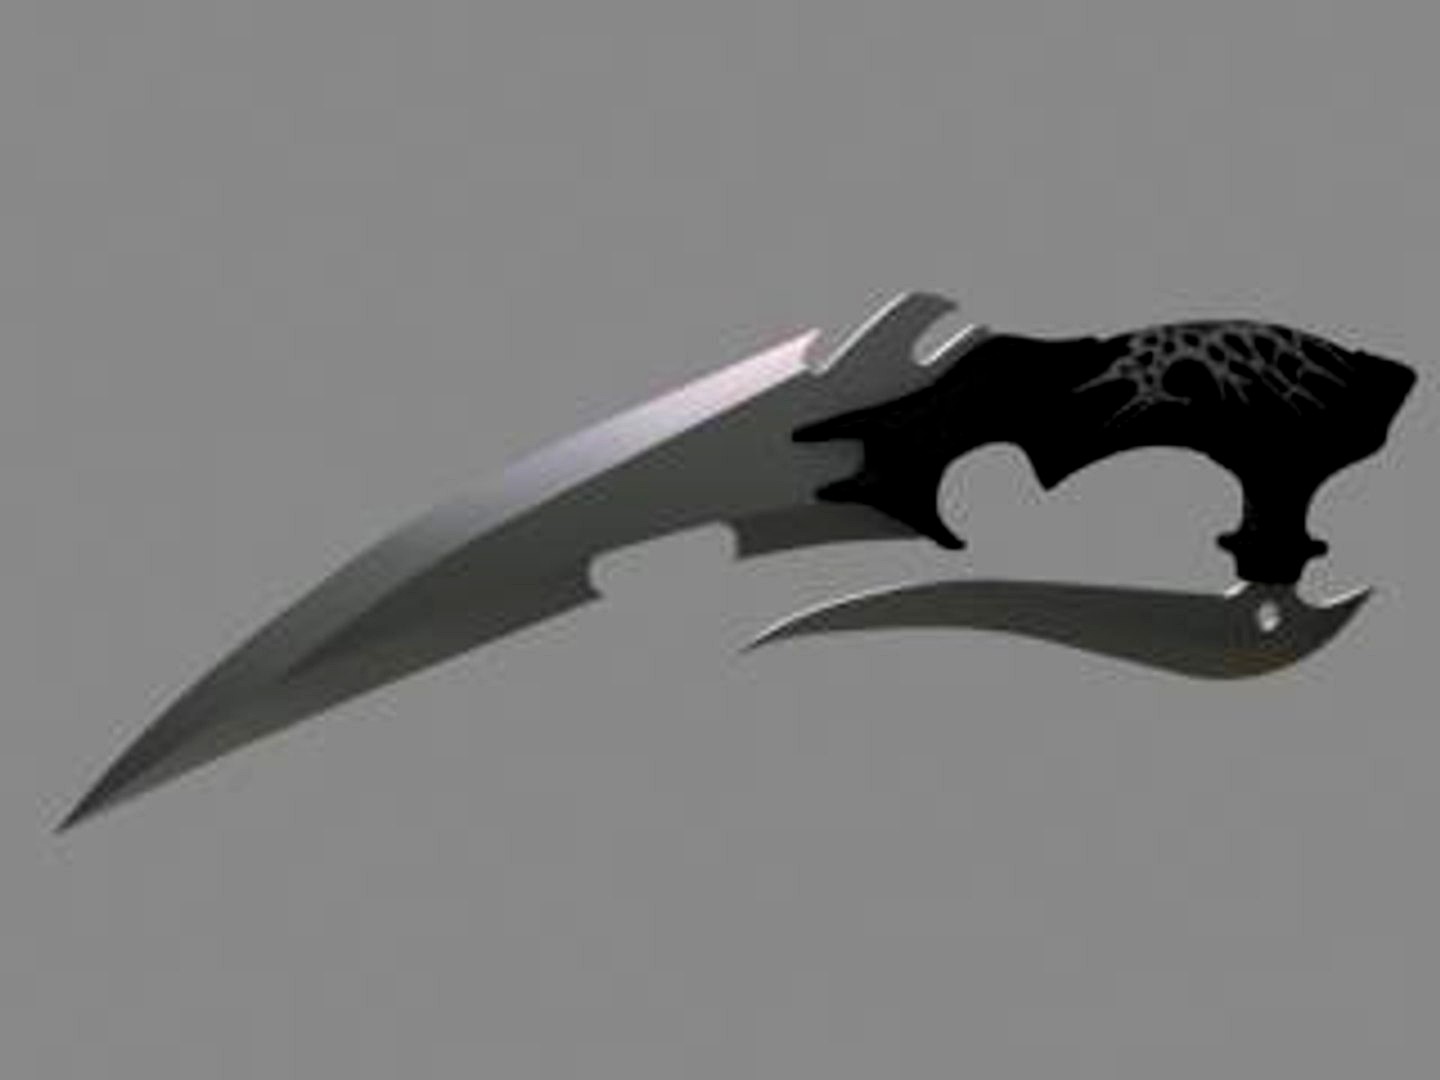 sell knife 01.max